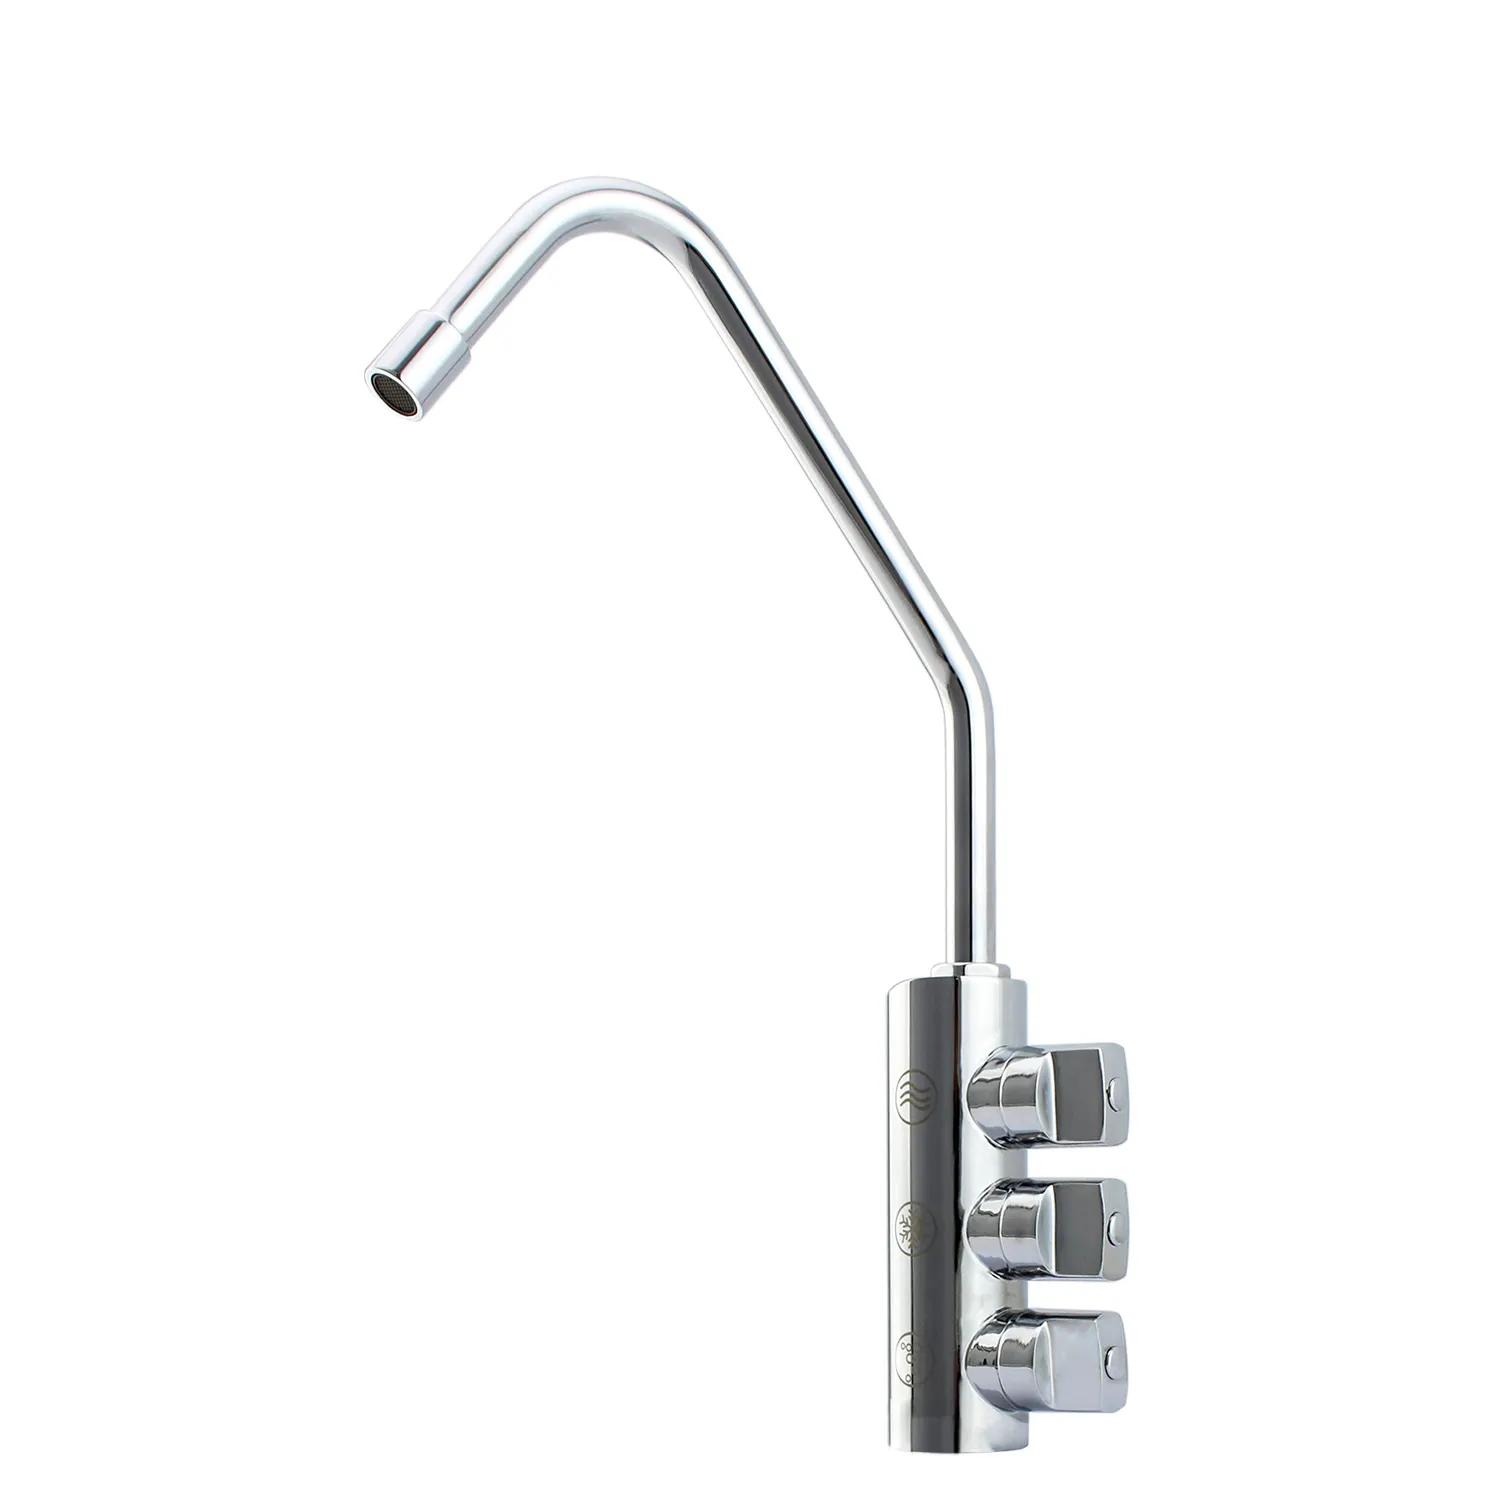 DOGO 3 Way Kitchen Sparkling Water Taps Solid Brass 3 em 1 Soda Water Faucet